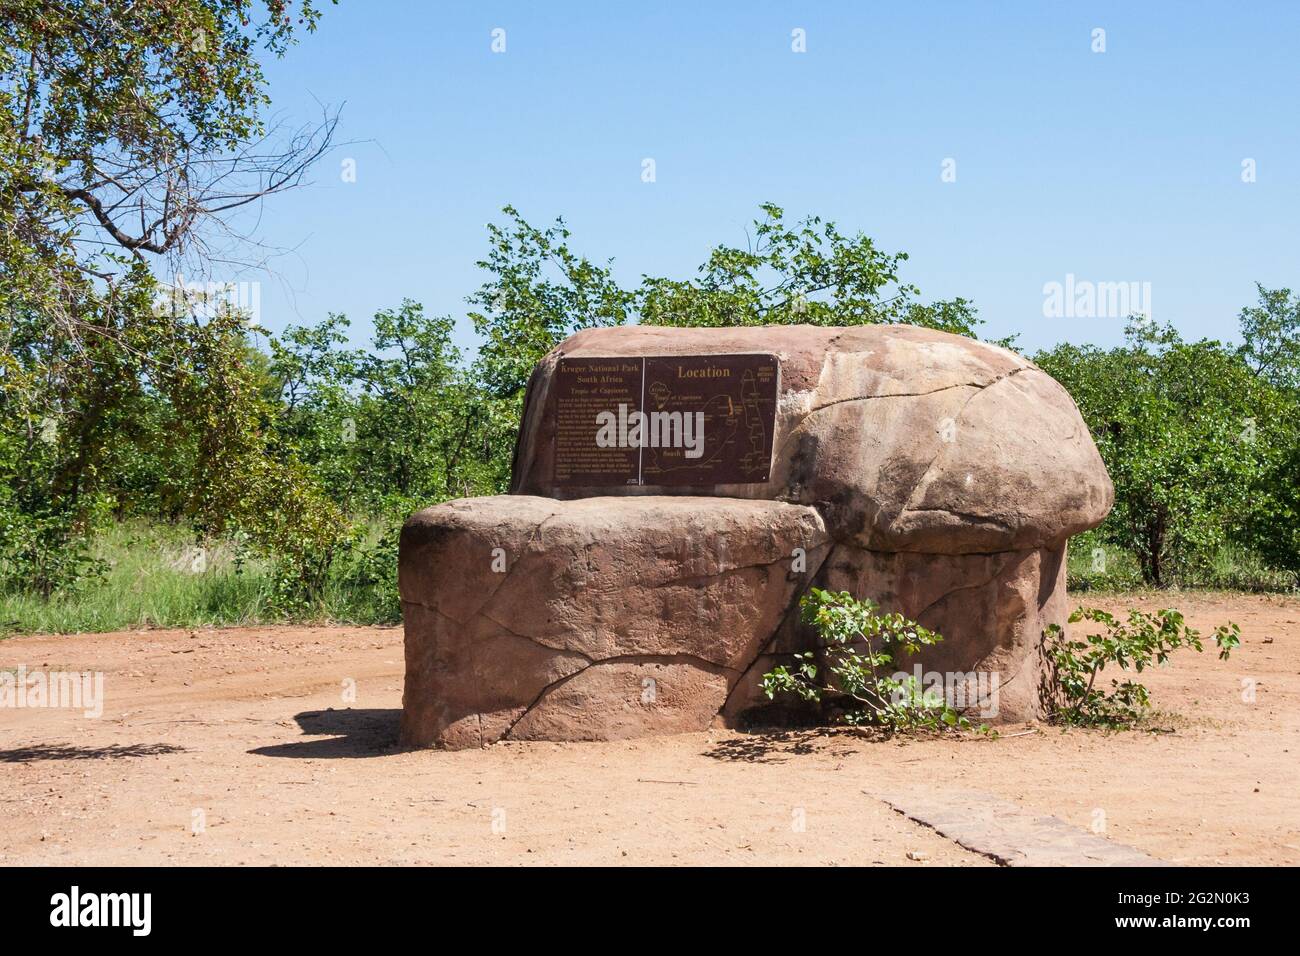 Kruger National Park, South Africa April 17 2016: Tropic of Capricorn landmark sign monument marks the circle of latitude of the southern solstice. Stock Photo